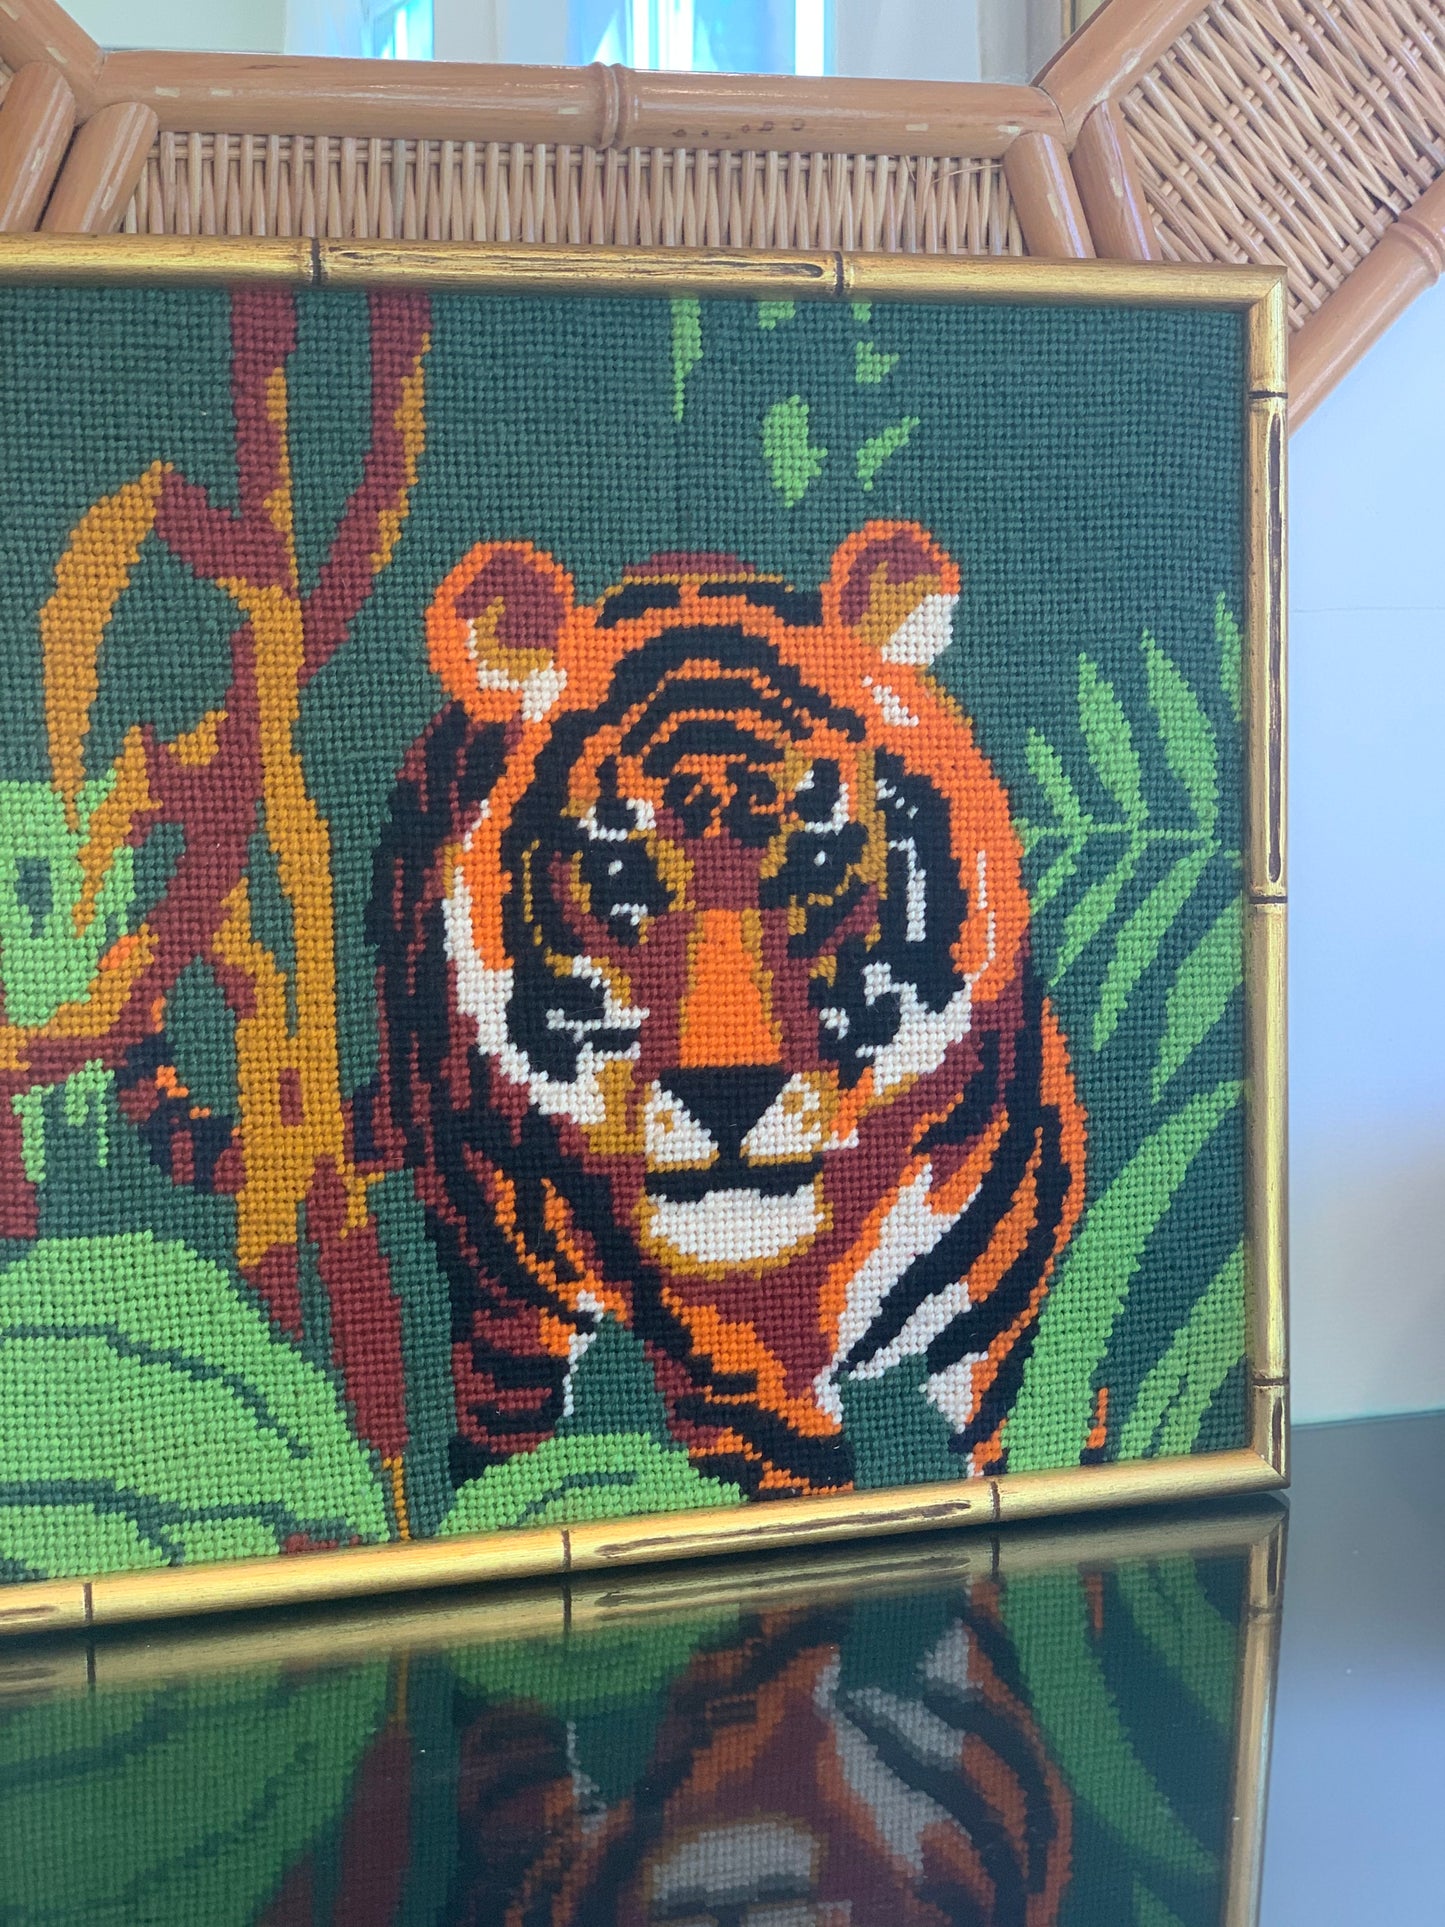 Tiger Needlepoint in Gold Bamboo Frame (14.25x12.75) [1970]